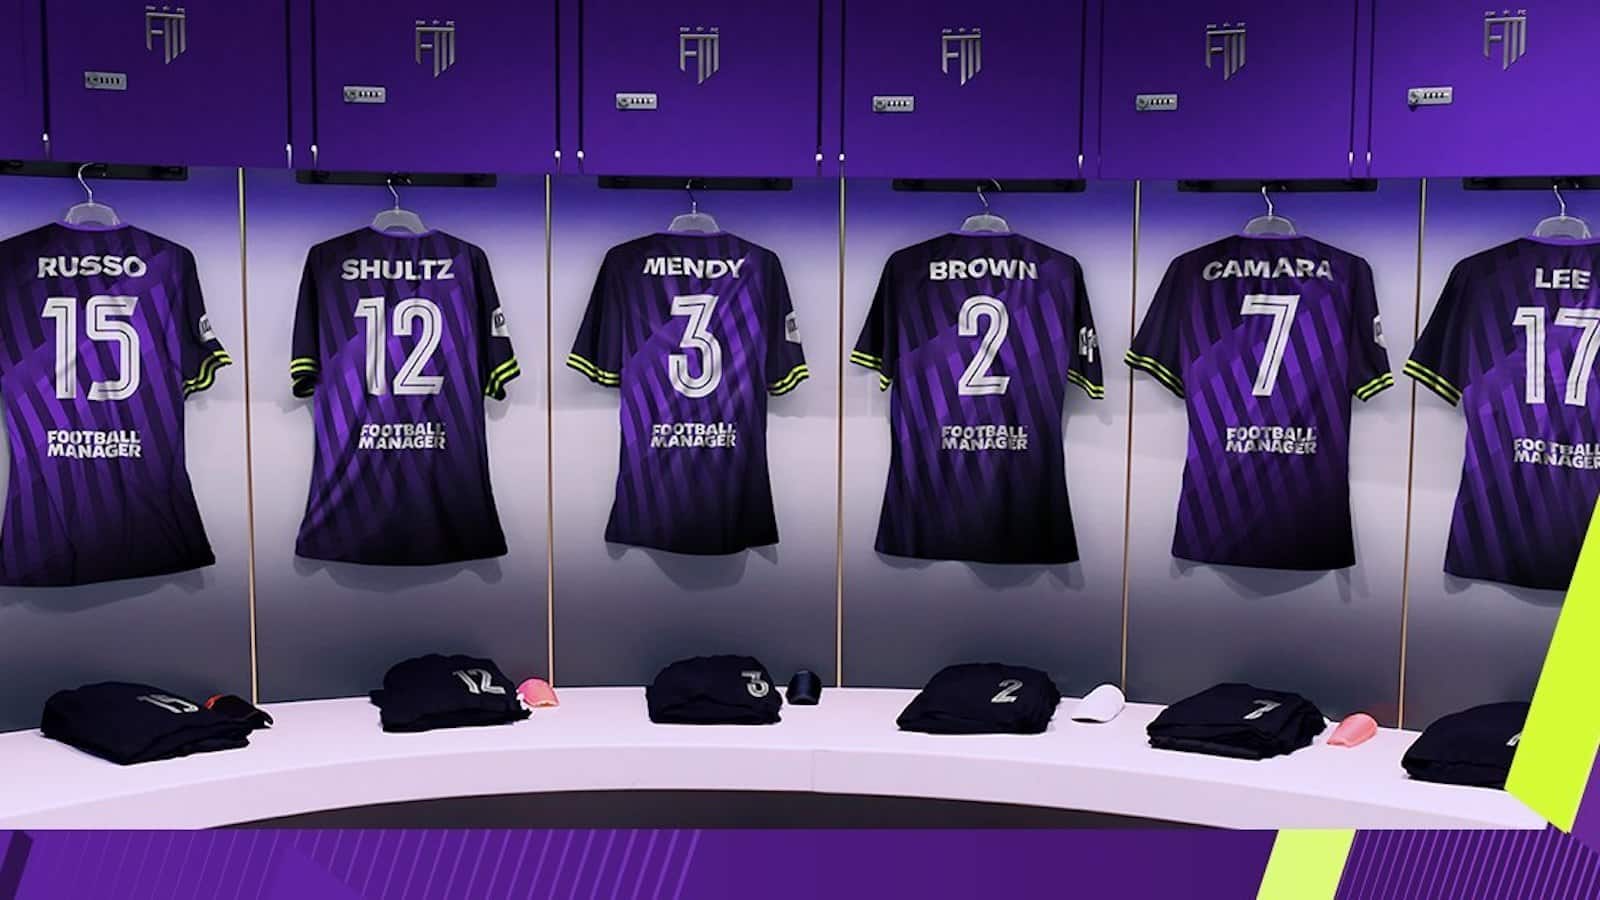 Football manager 2022 image showing a locker room